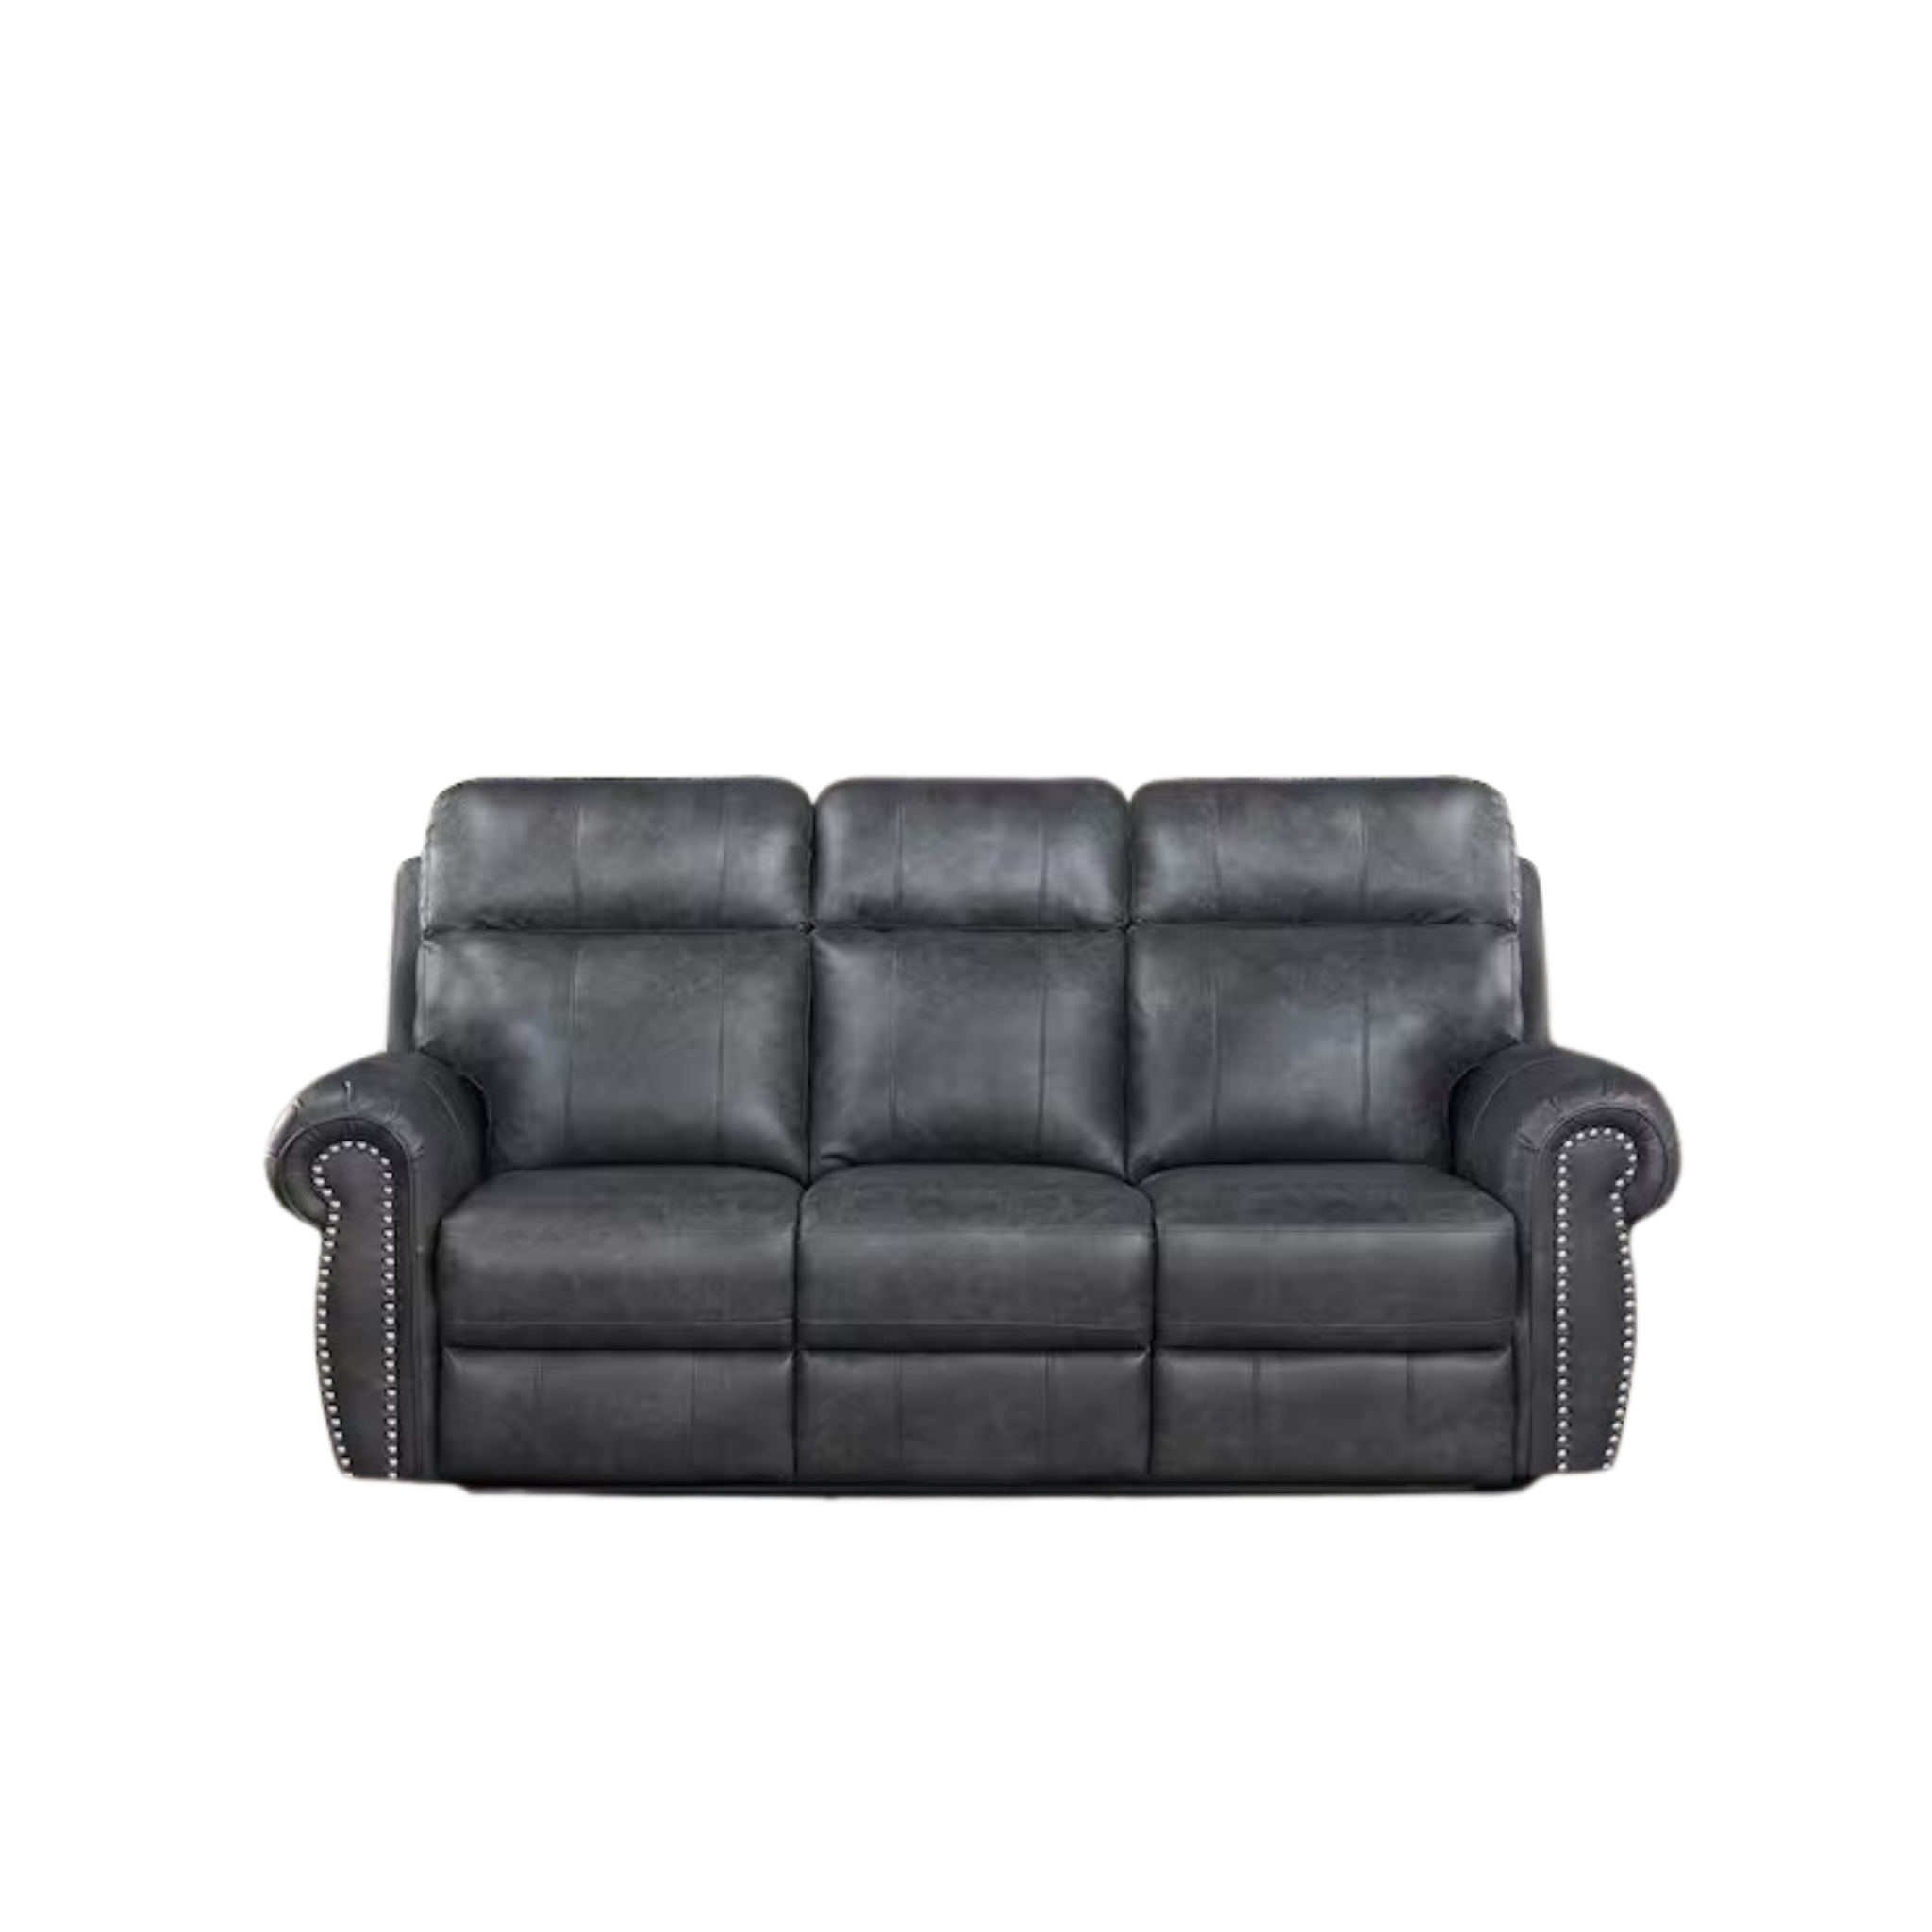 Rolled Arm Faux Leather Rectangle Manual Double Reclining Sofa (2 Colors)